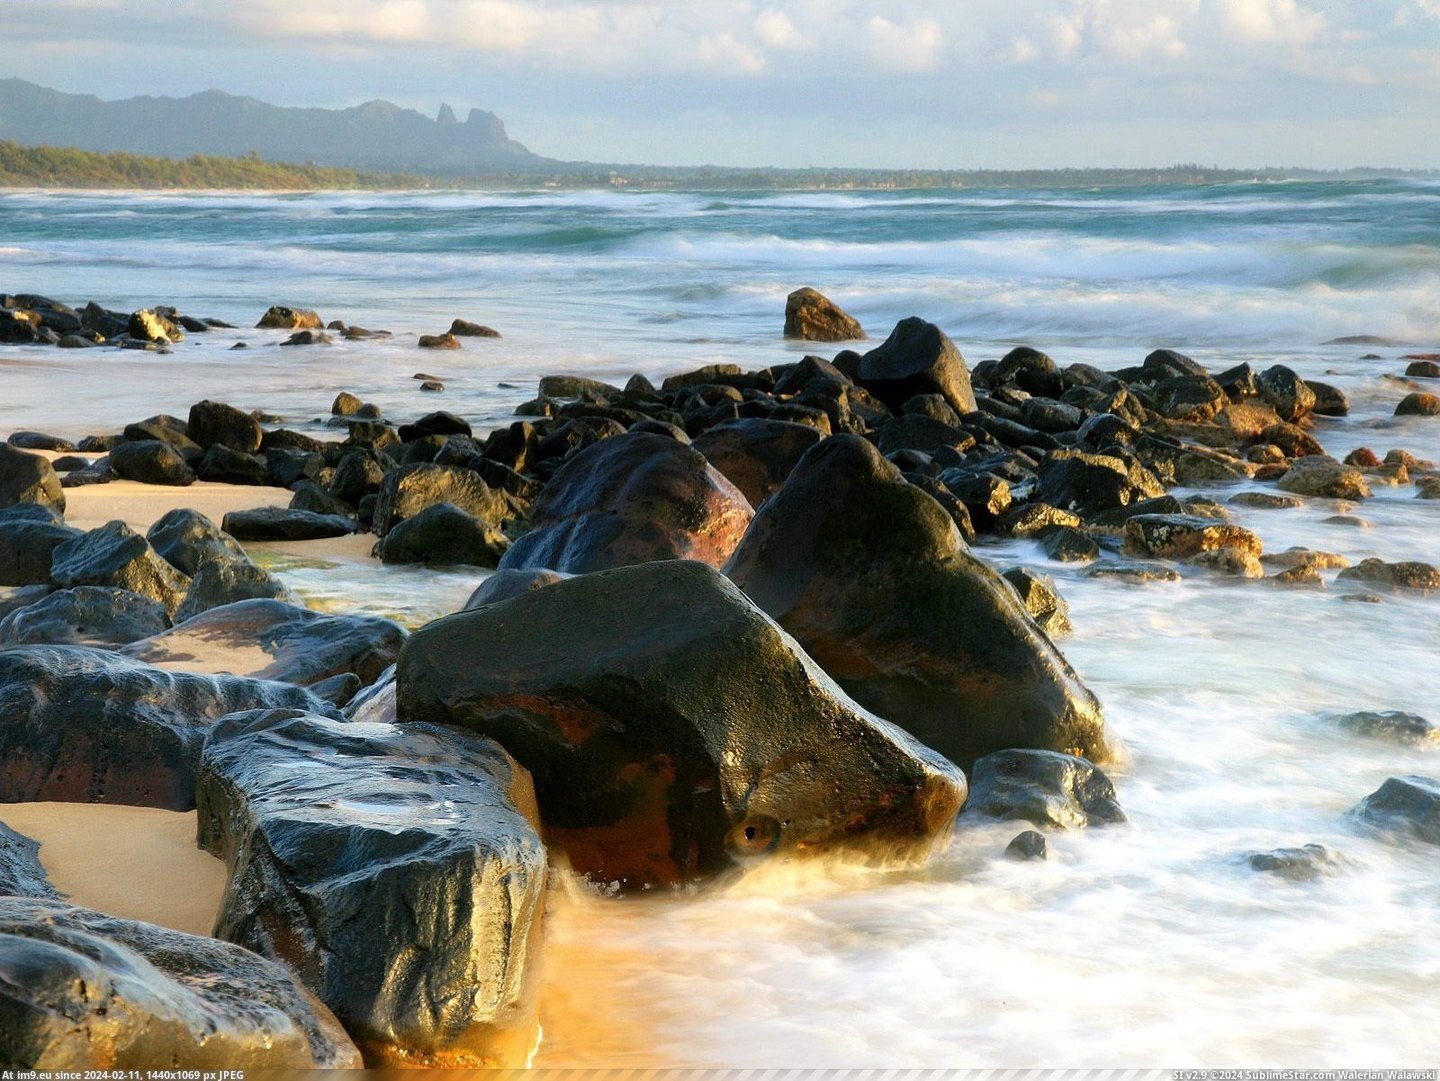 Sunrise Light on the Shore, Kong Mountain in the Distance, Near Lihue, Kauai (in Beautiful photos and wallpapers)